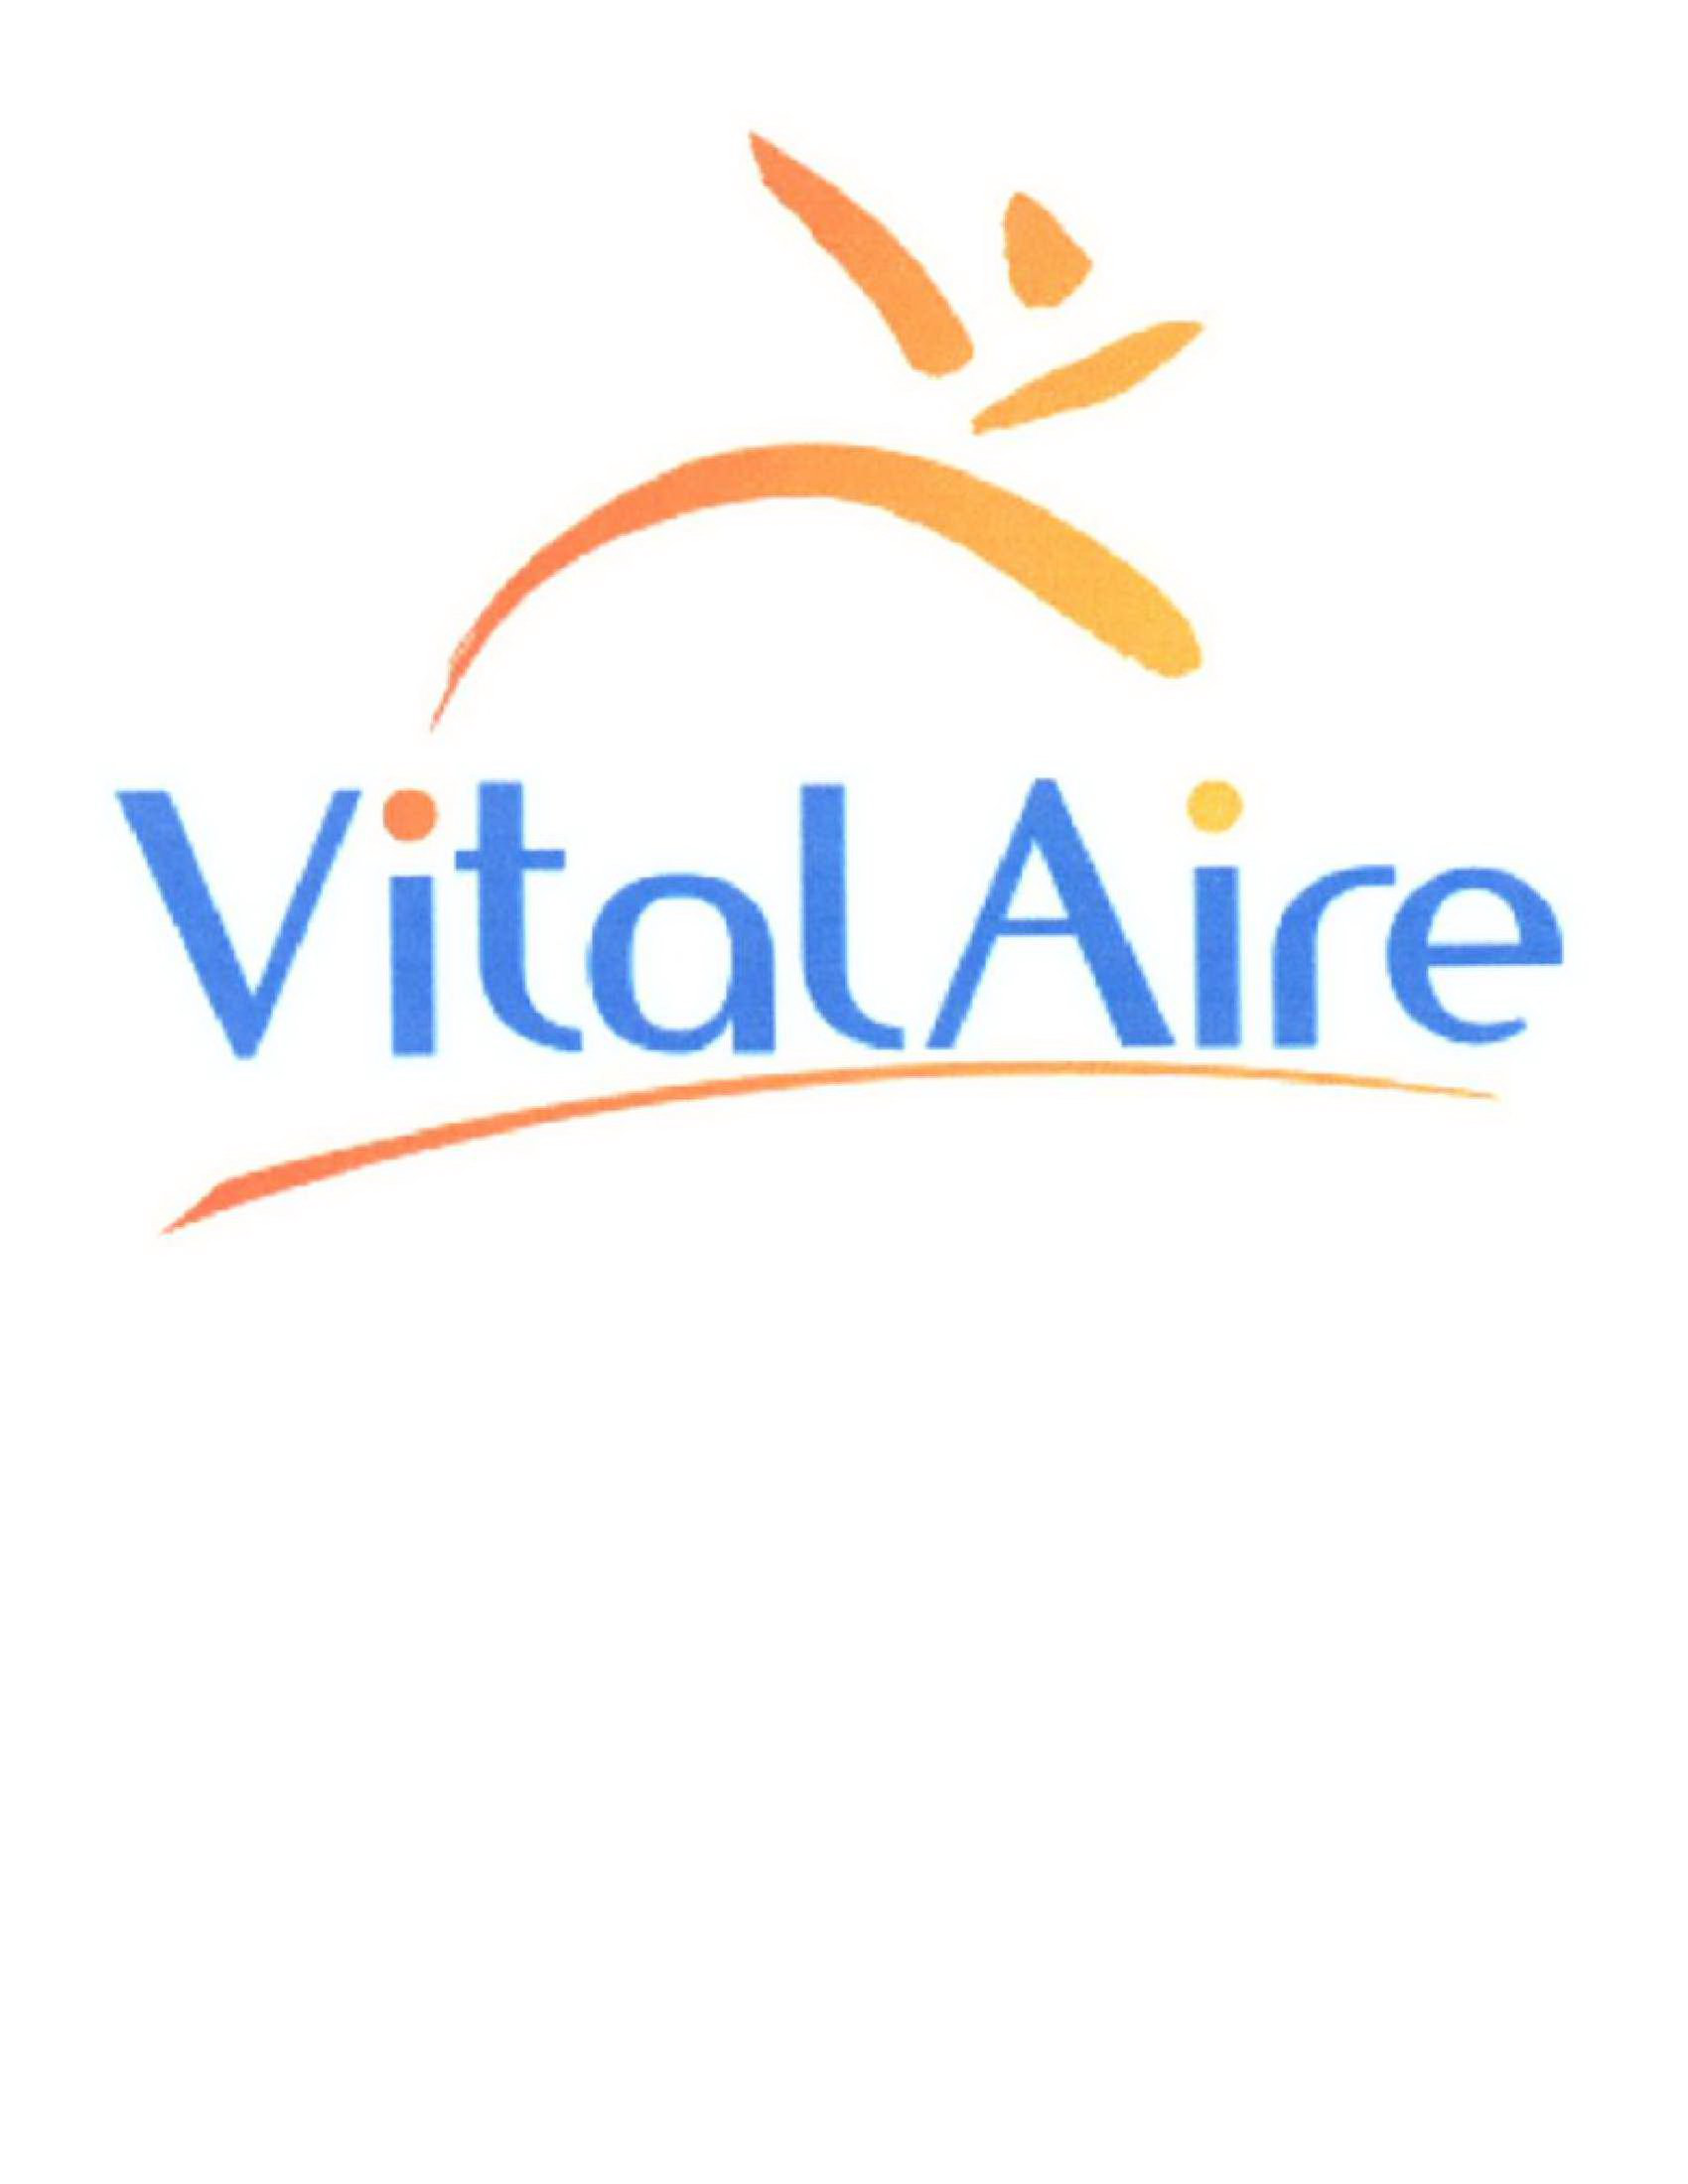 Vital aire